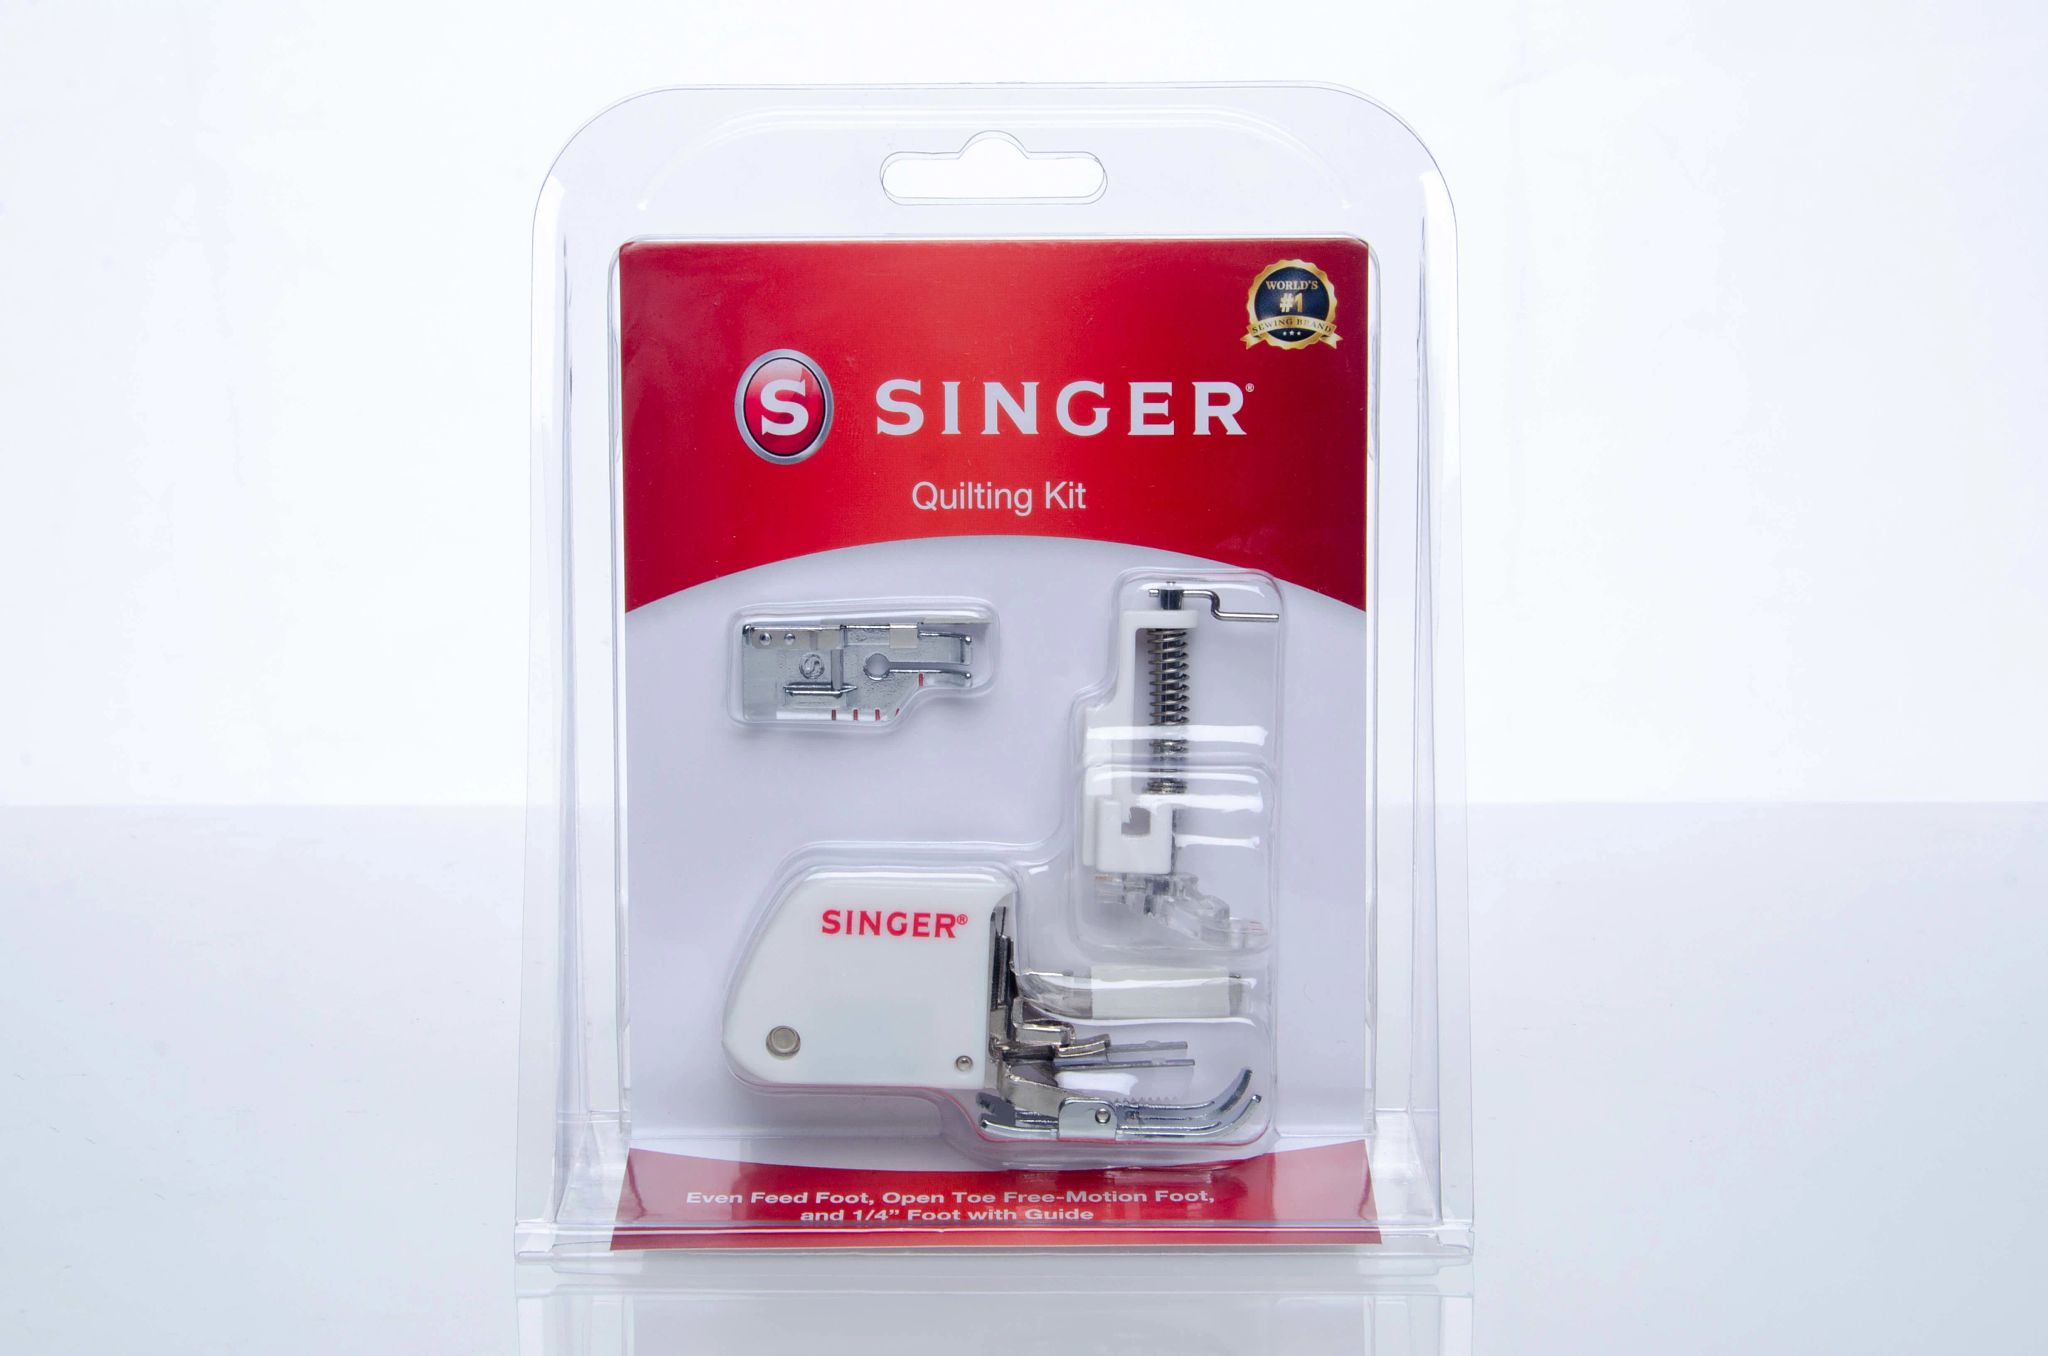 Singer Walking Foot With Seam Guide